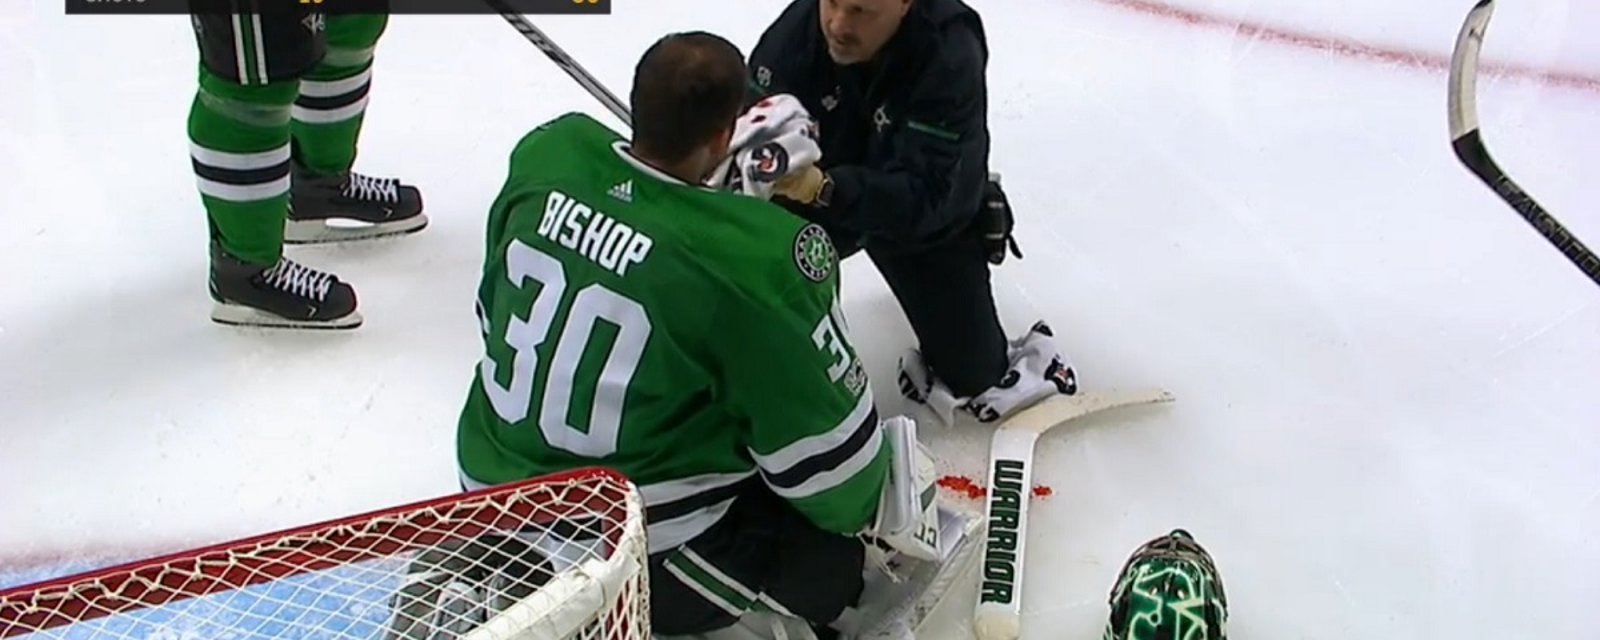 Hard shot  hits Ben Bishop in the head, leaves him a bloody mess.